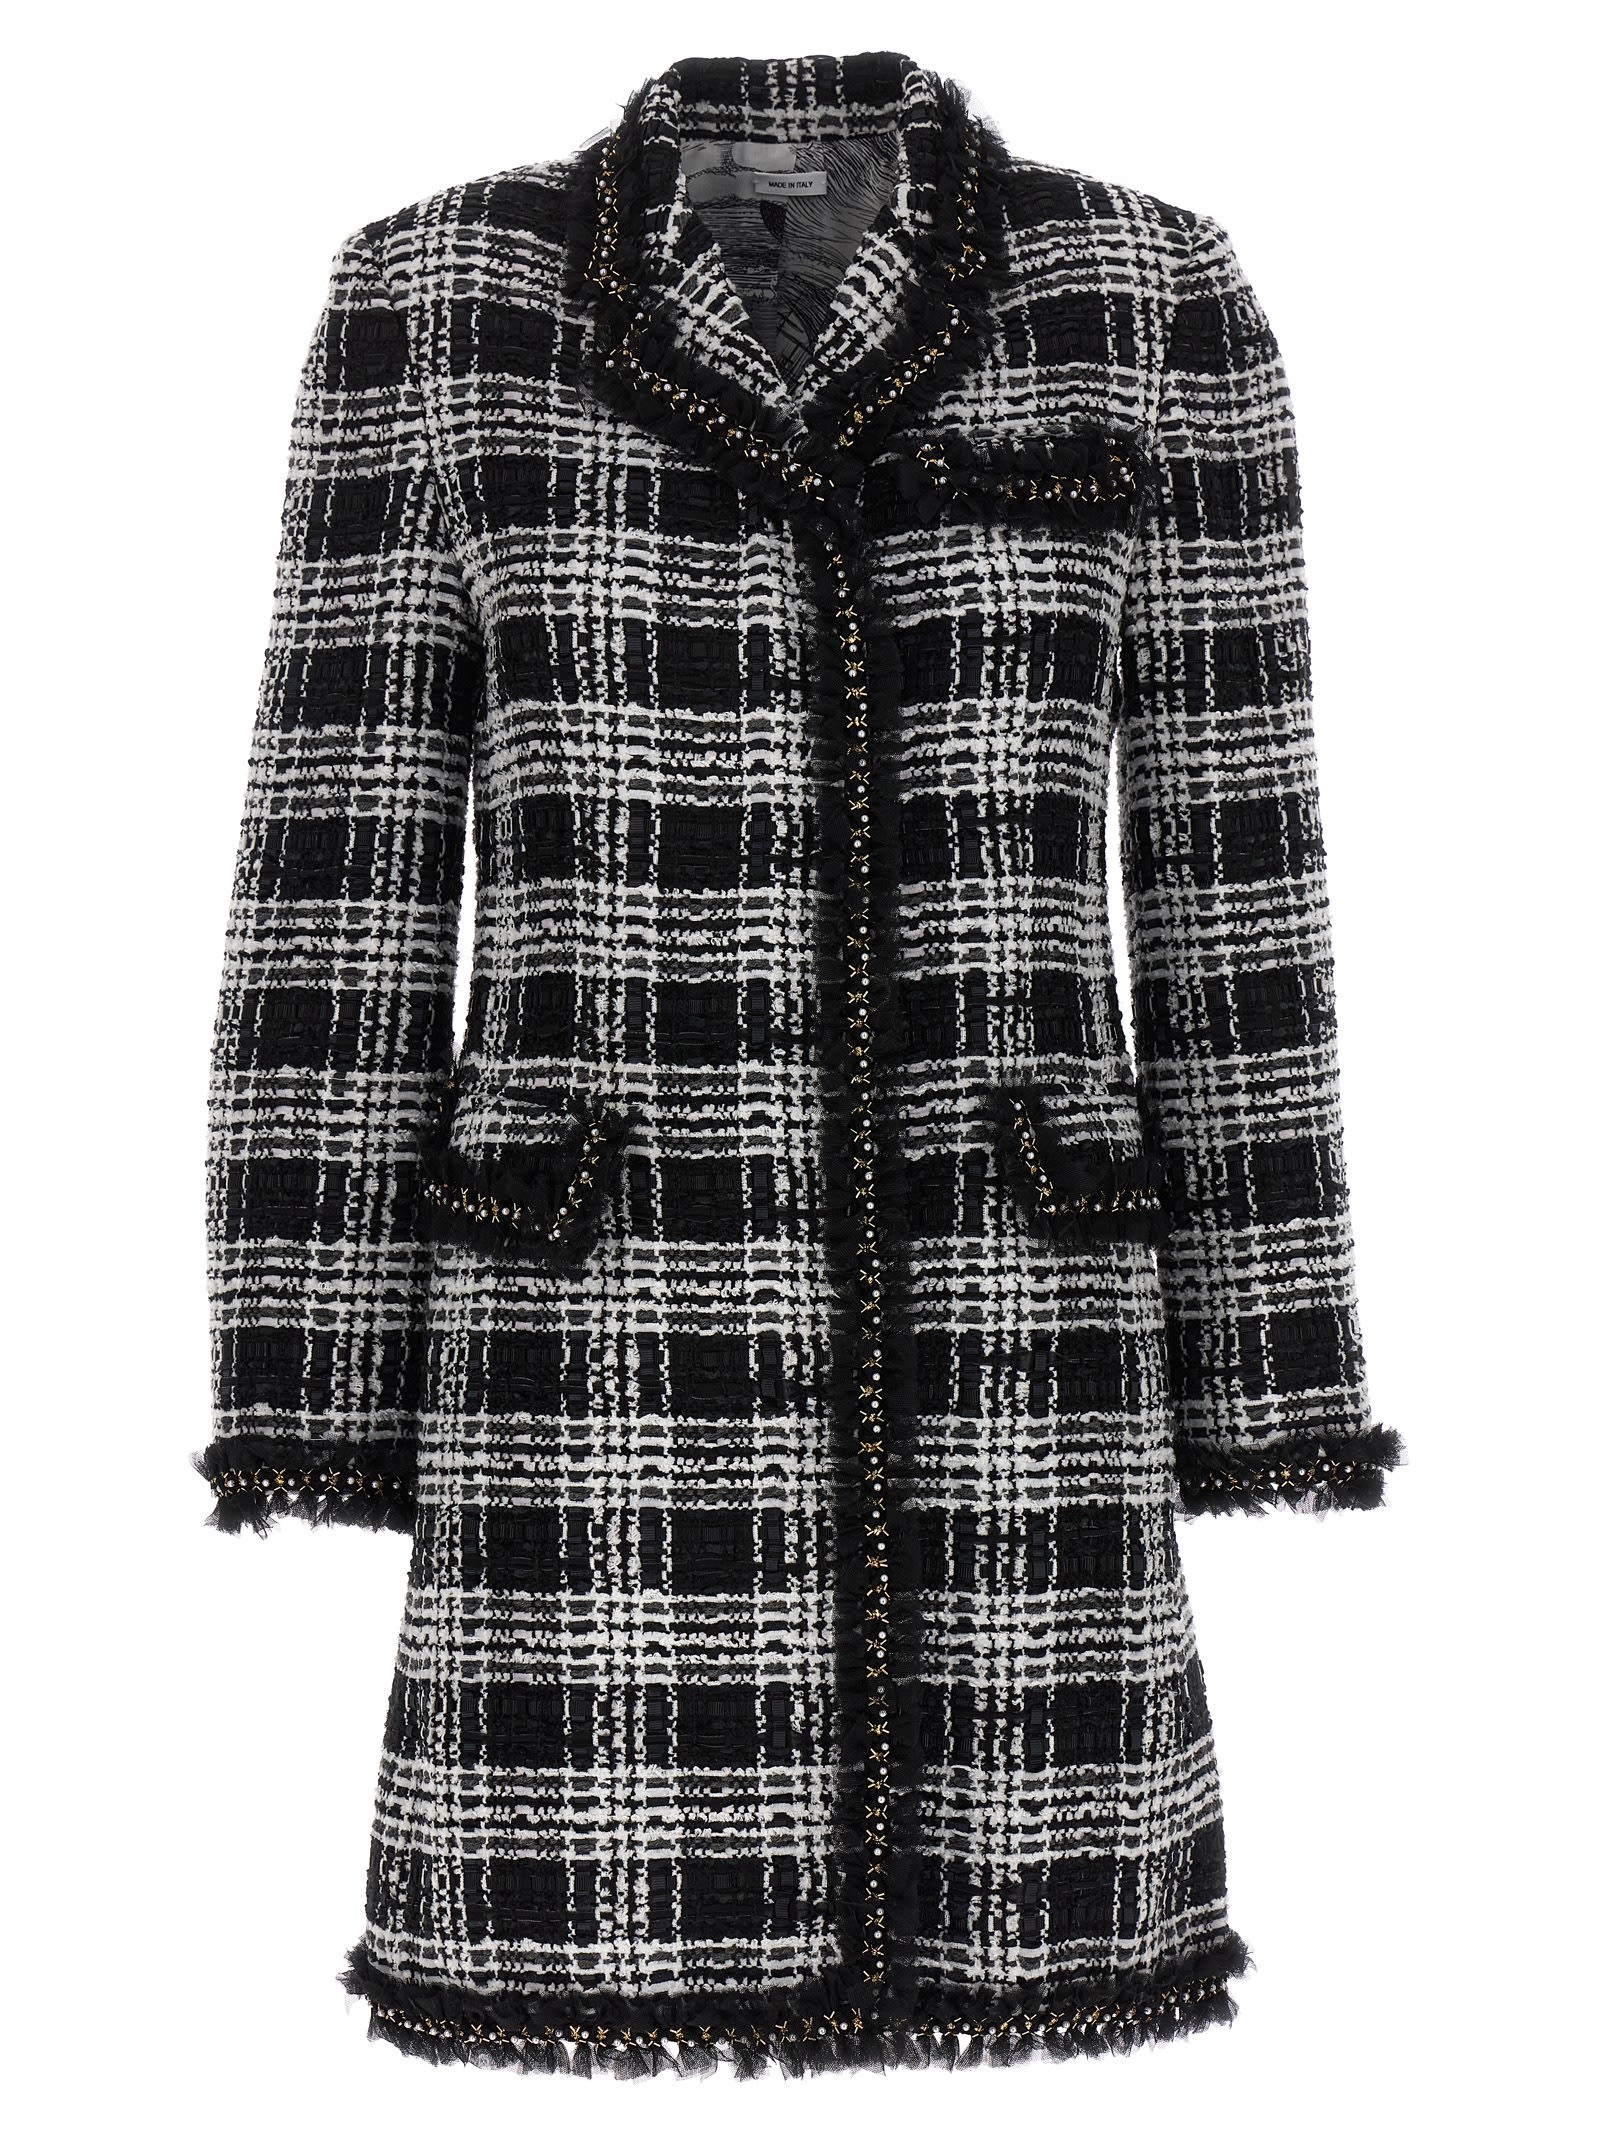 THOM BROWNE CHESTERFIELD DRESS